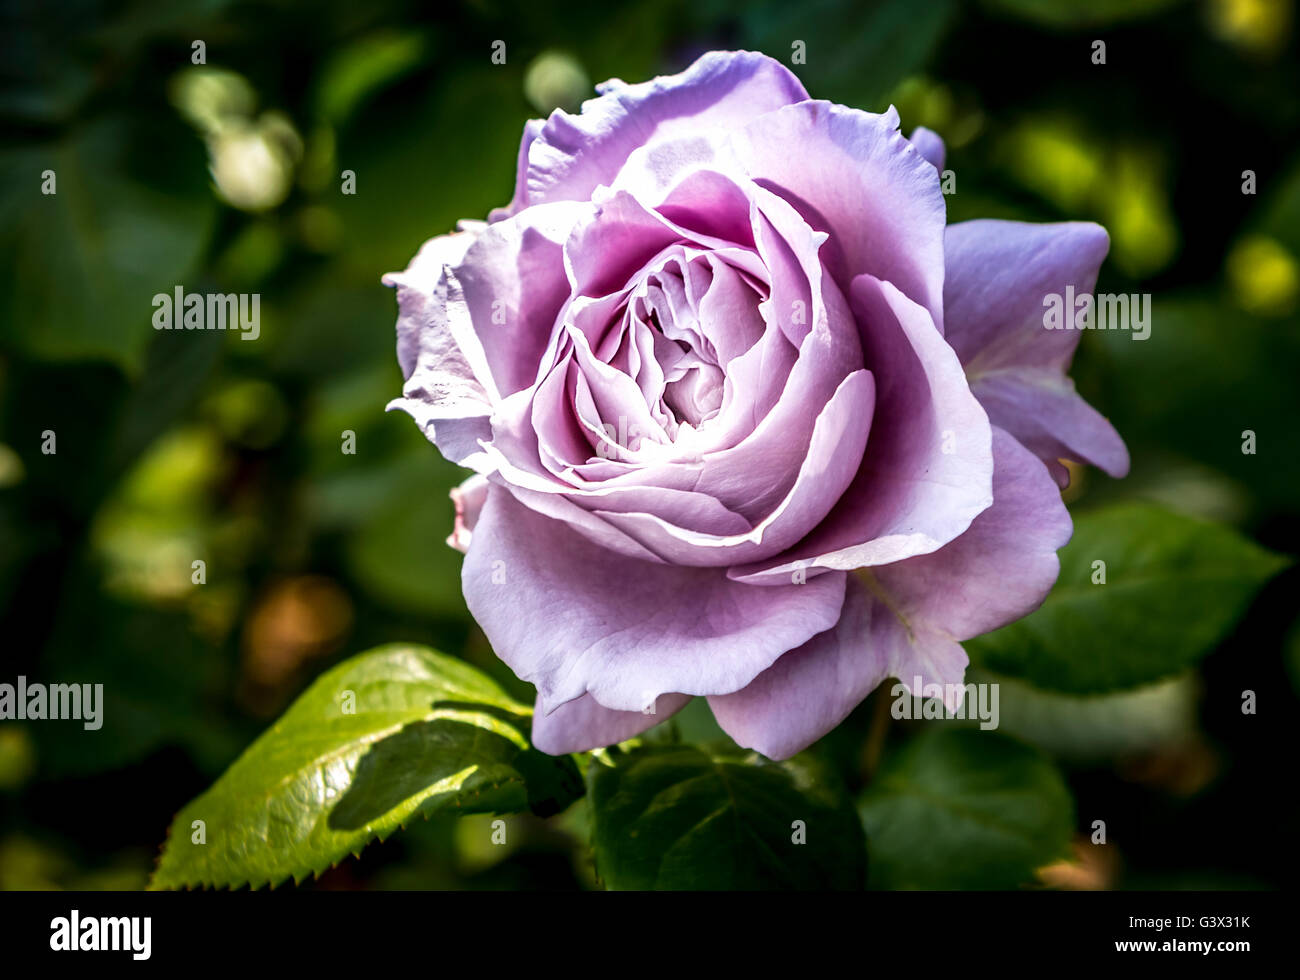 Enchanted Rose High Resolution Stock Photography and Images - Alamy